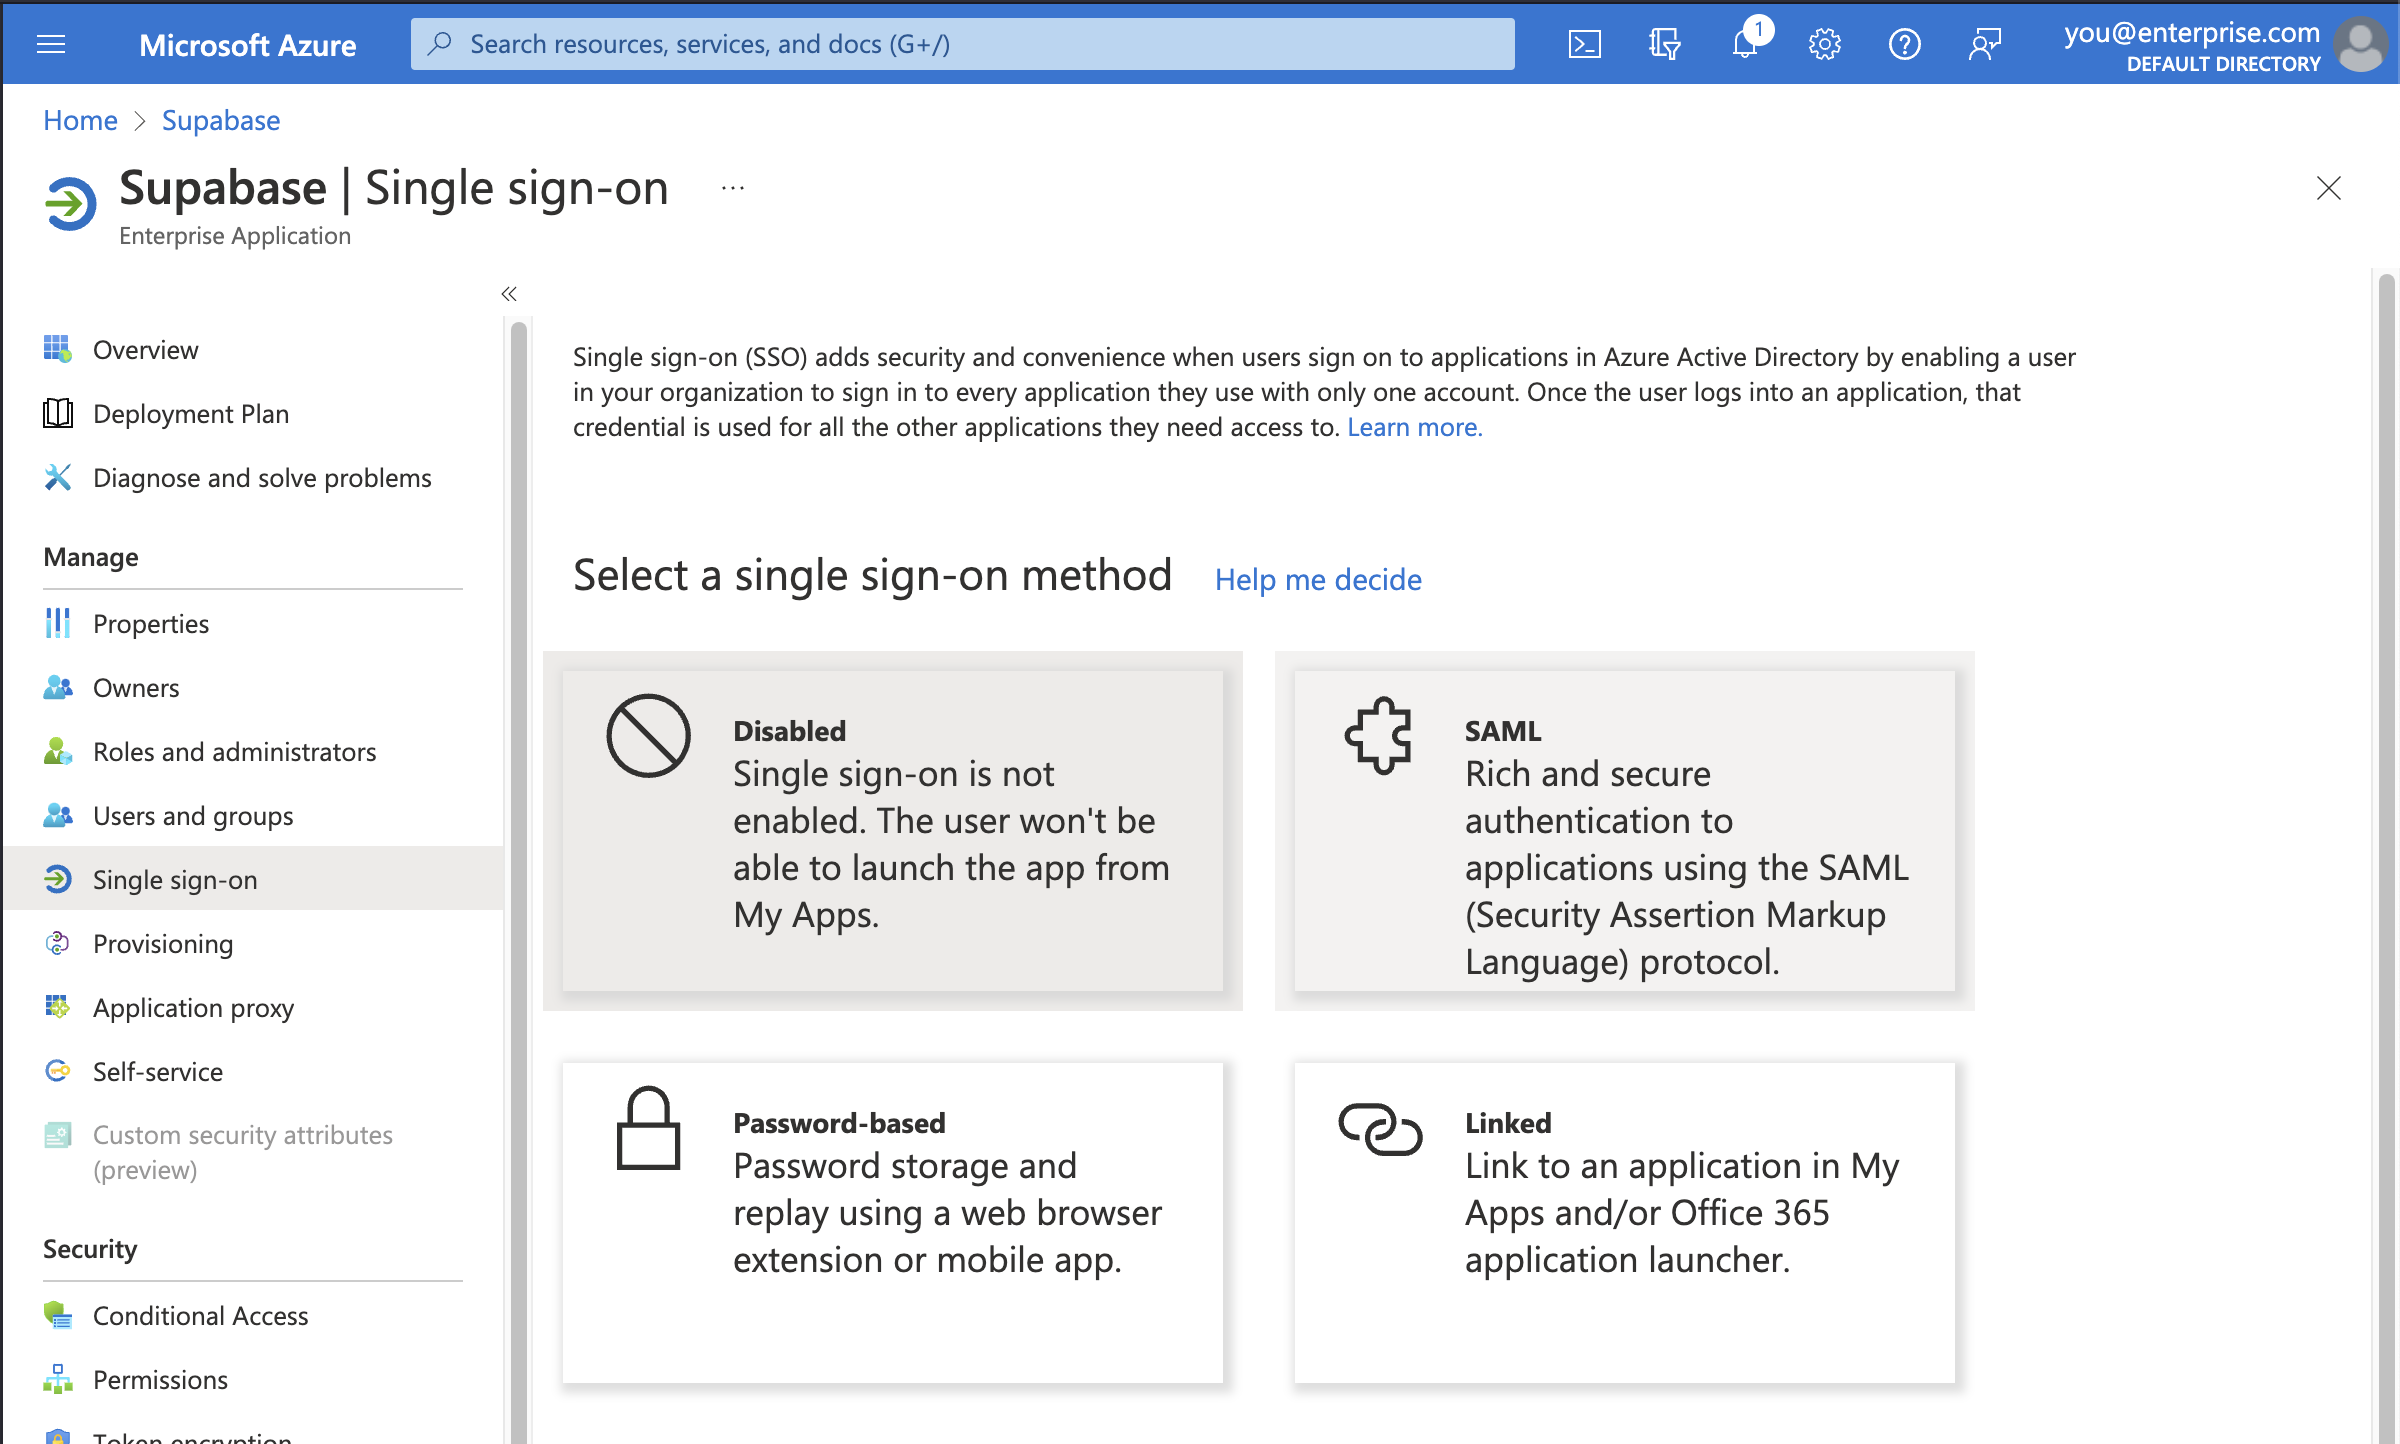 Azure AD console: Supabase application, Single sign-on configuration screen, selected SAML